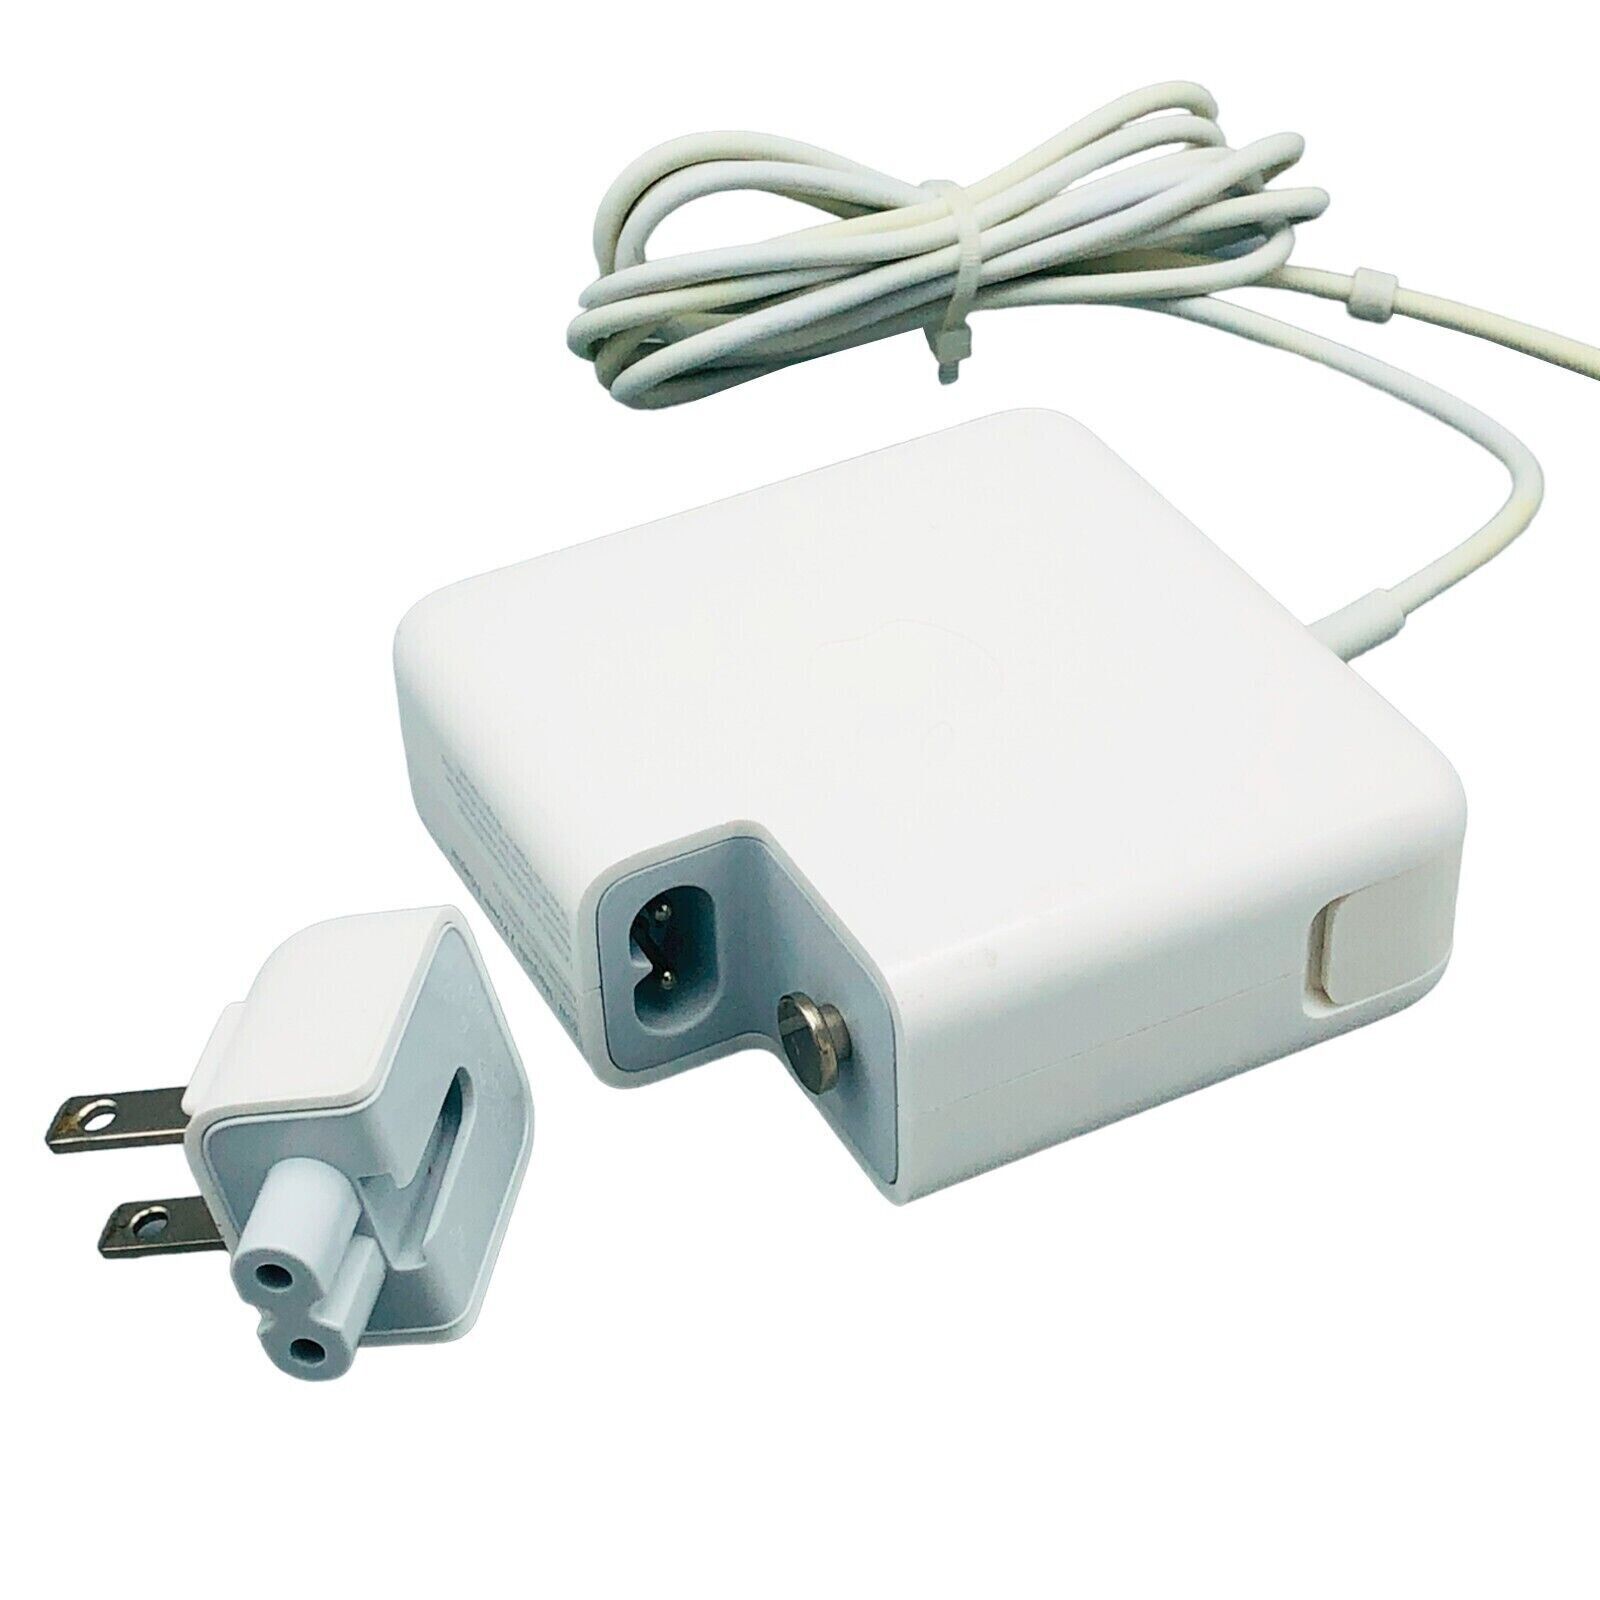 Apple A1436 45W MagSafe 2 Charger for MacBook Air